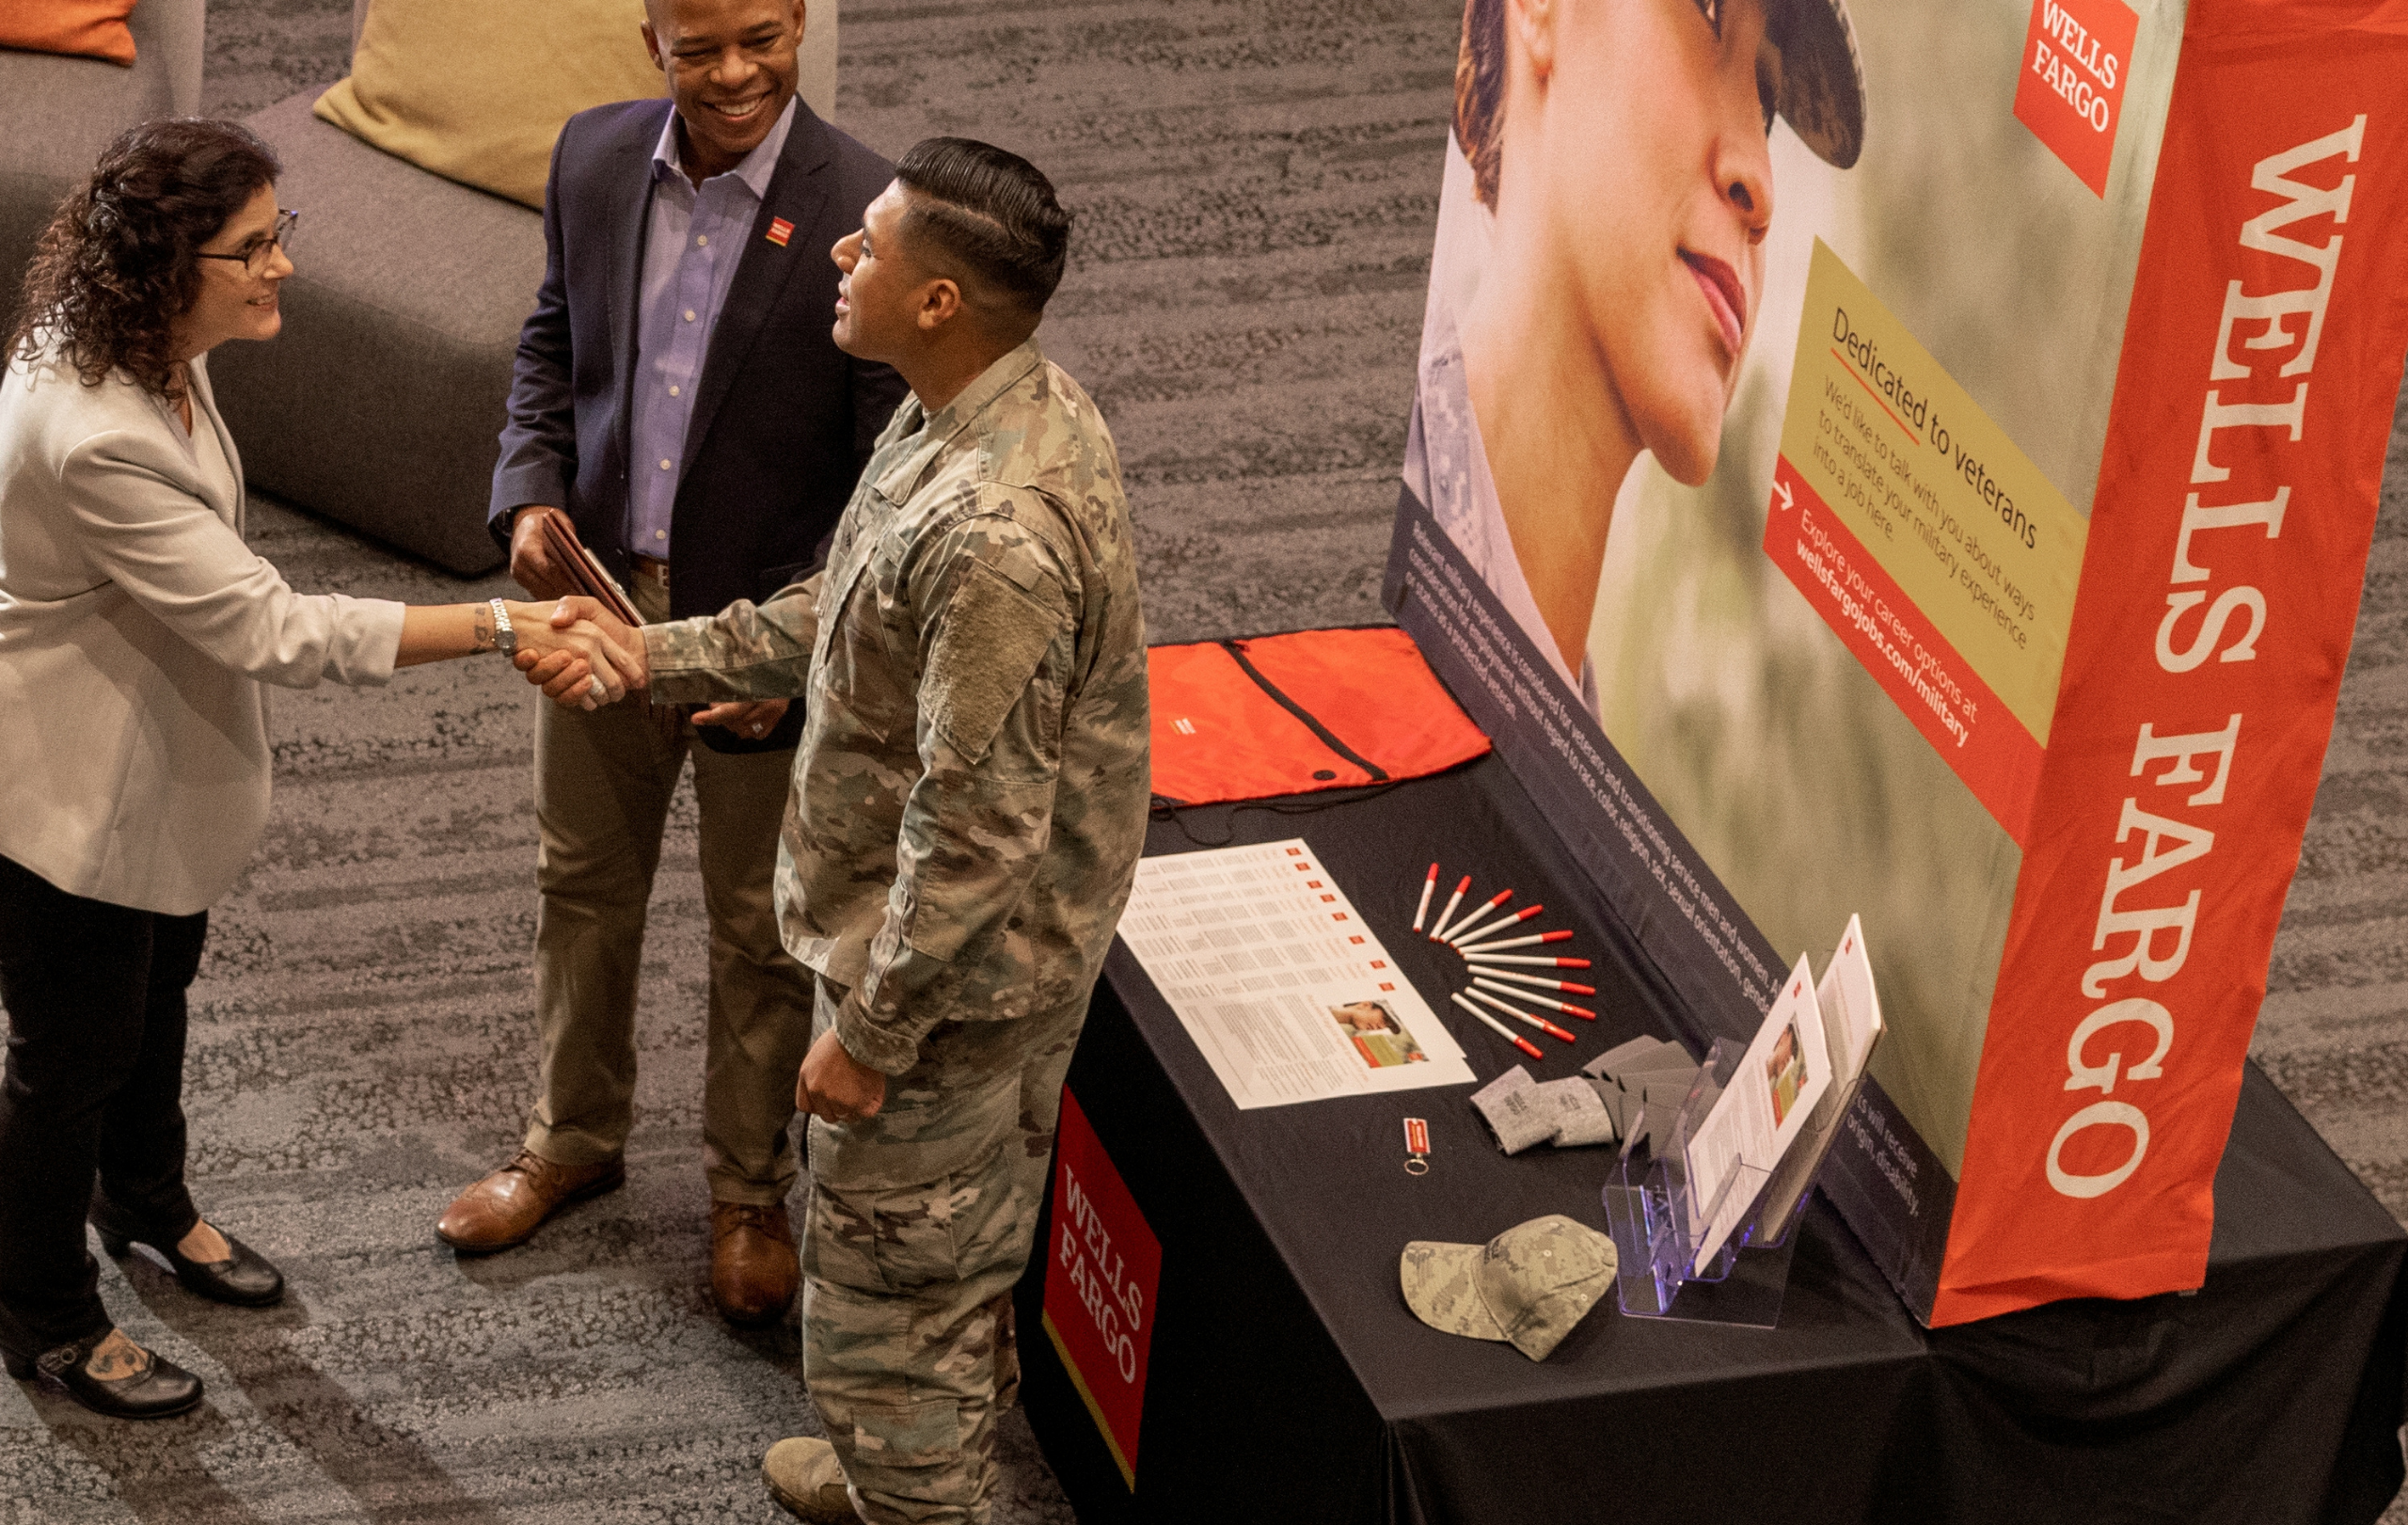 How Wells Fargo’s veteran employment programs create pathways from military service to new careers - blog image